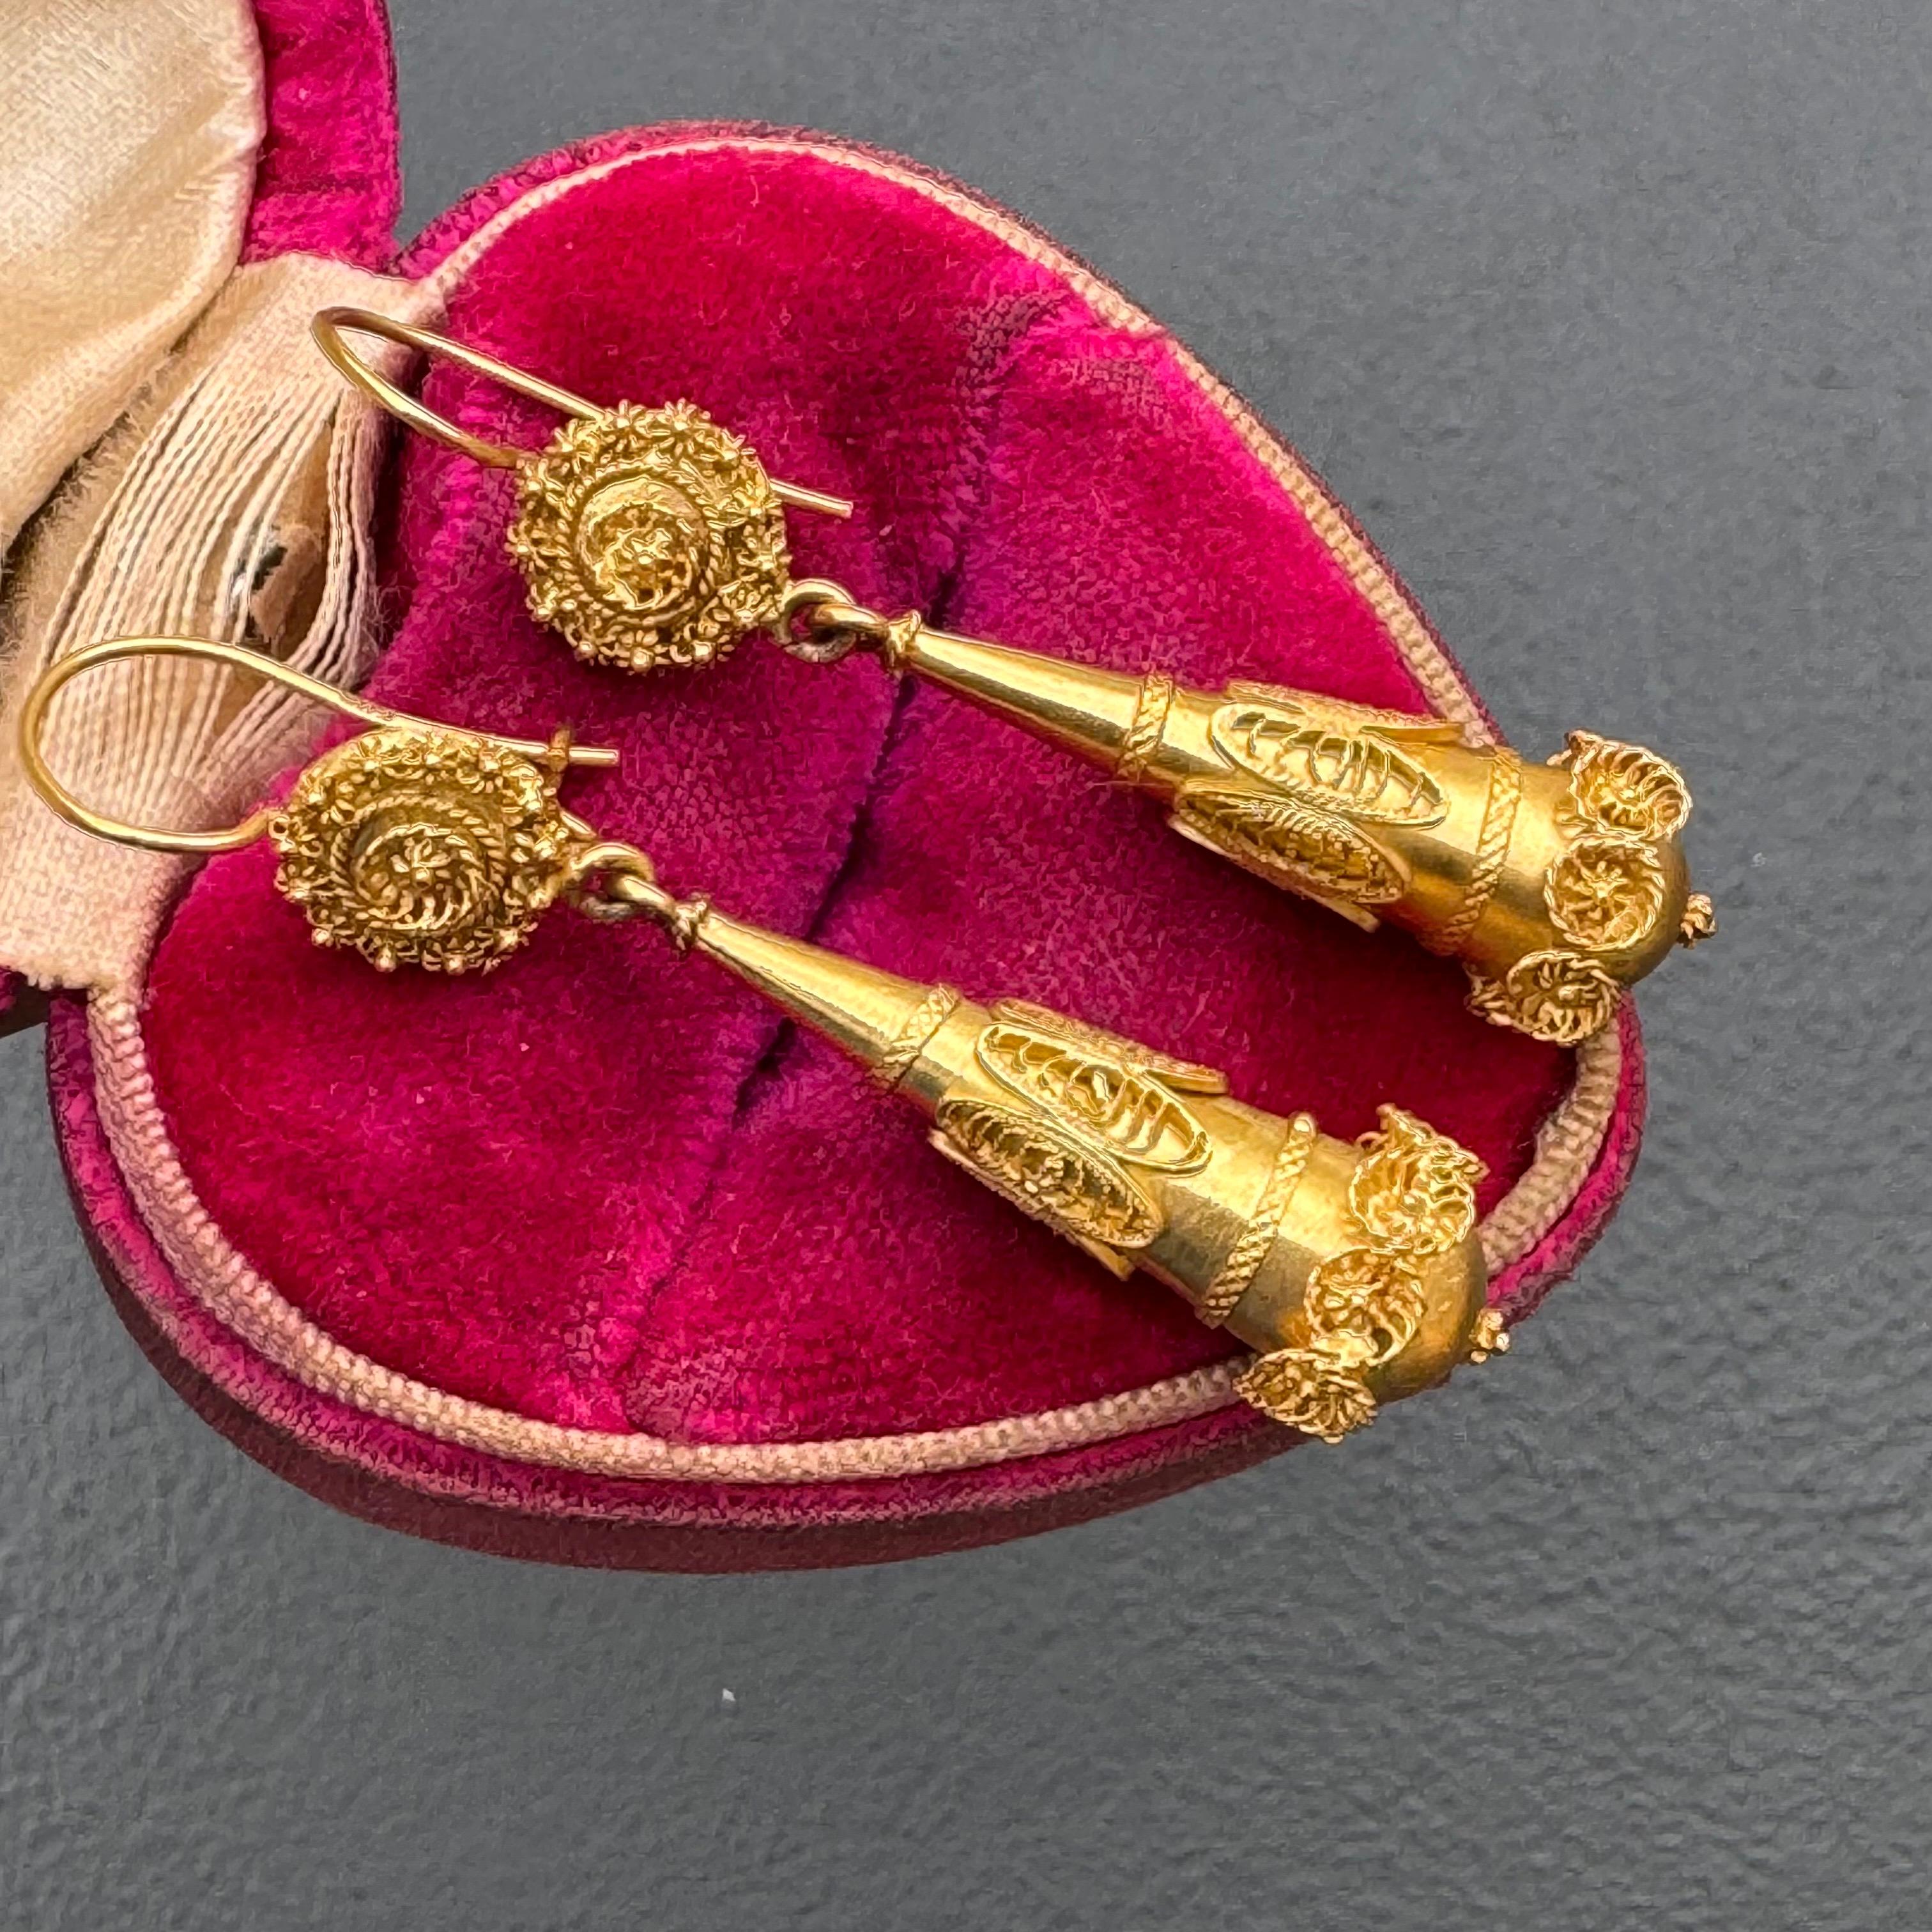 Handmade antique 14kt gold Torpedo earrings featuring fine applied filigree panels on hollow teardrop shape dangles. Looks handmade with beautiful details all around.

Dates late 19th to early 20th century 
Marked 585 ( for 14kt gold )

Measurements